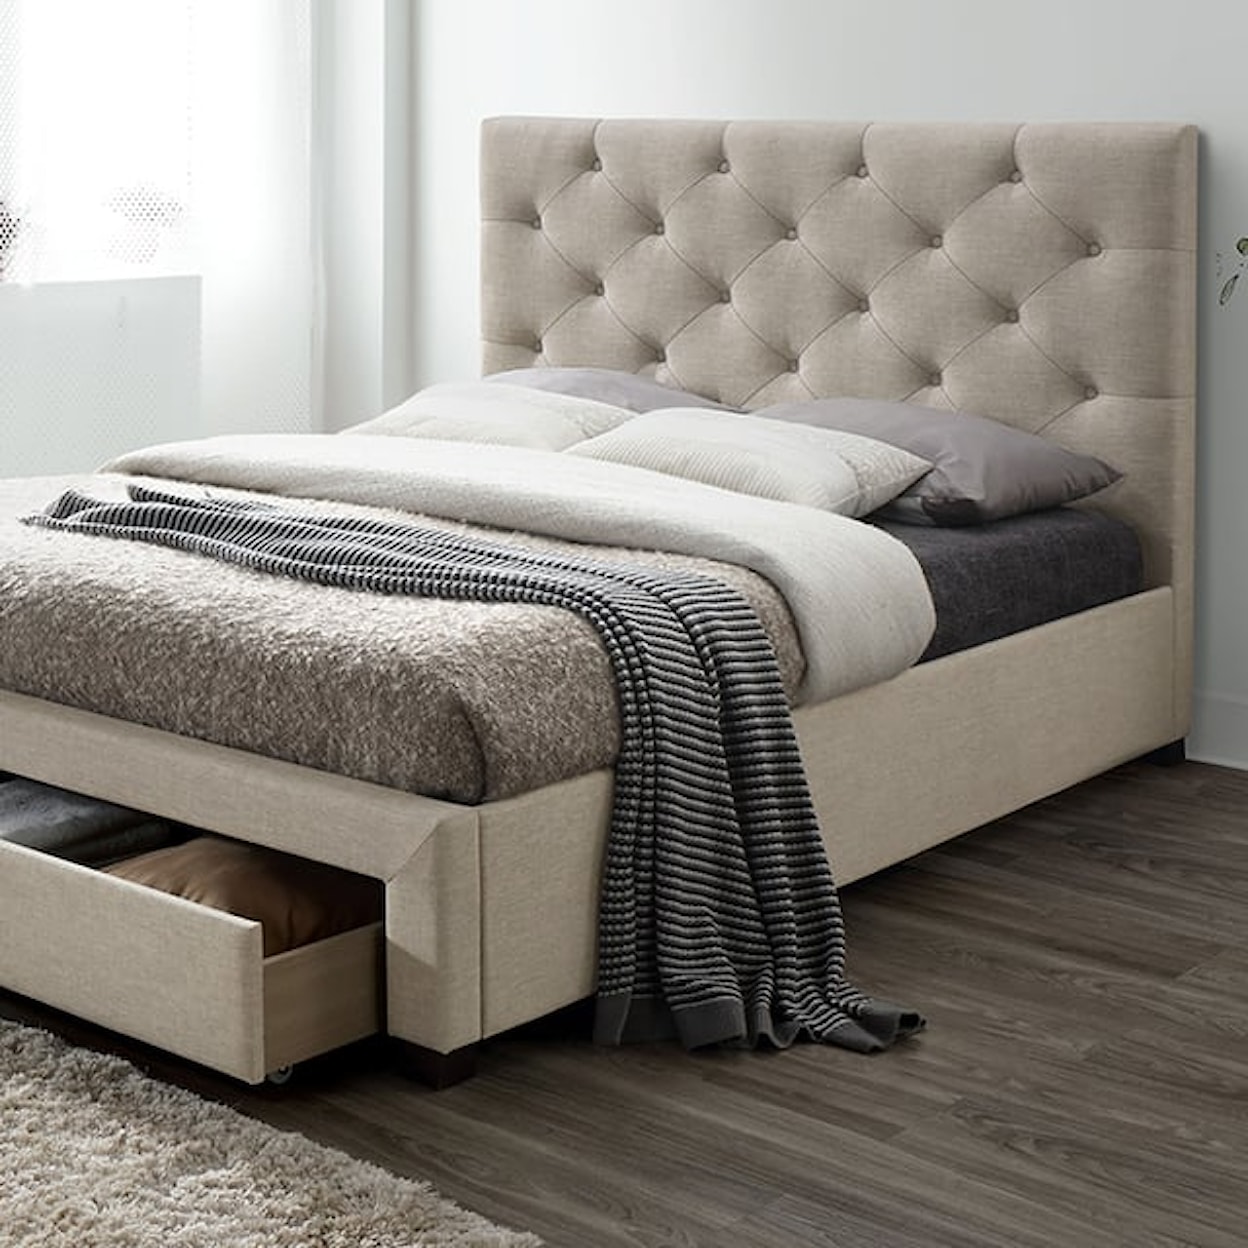 Furniture of America Sybella King Storage Bed